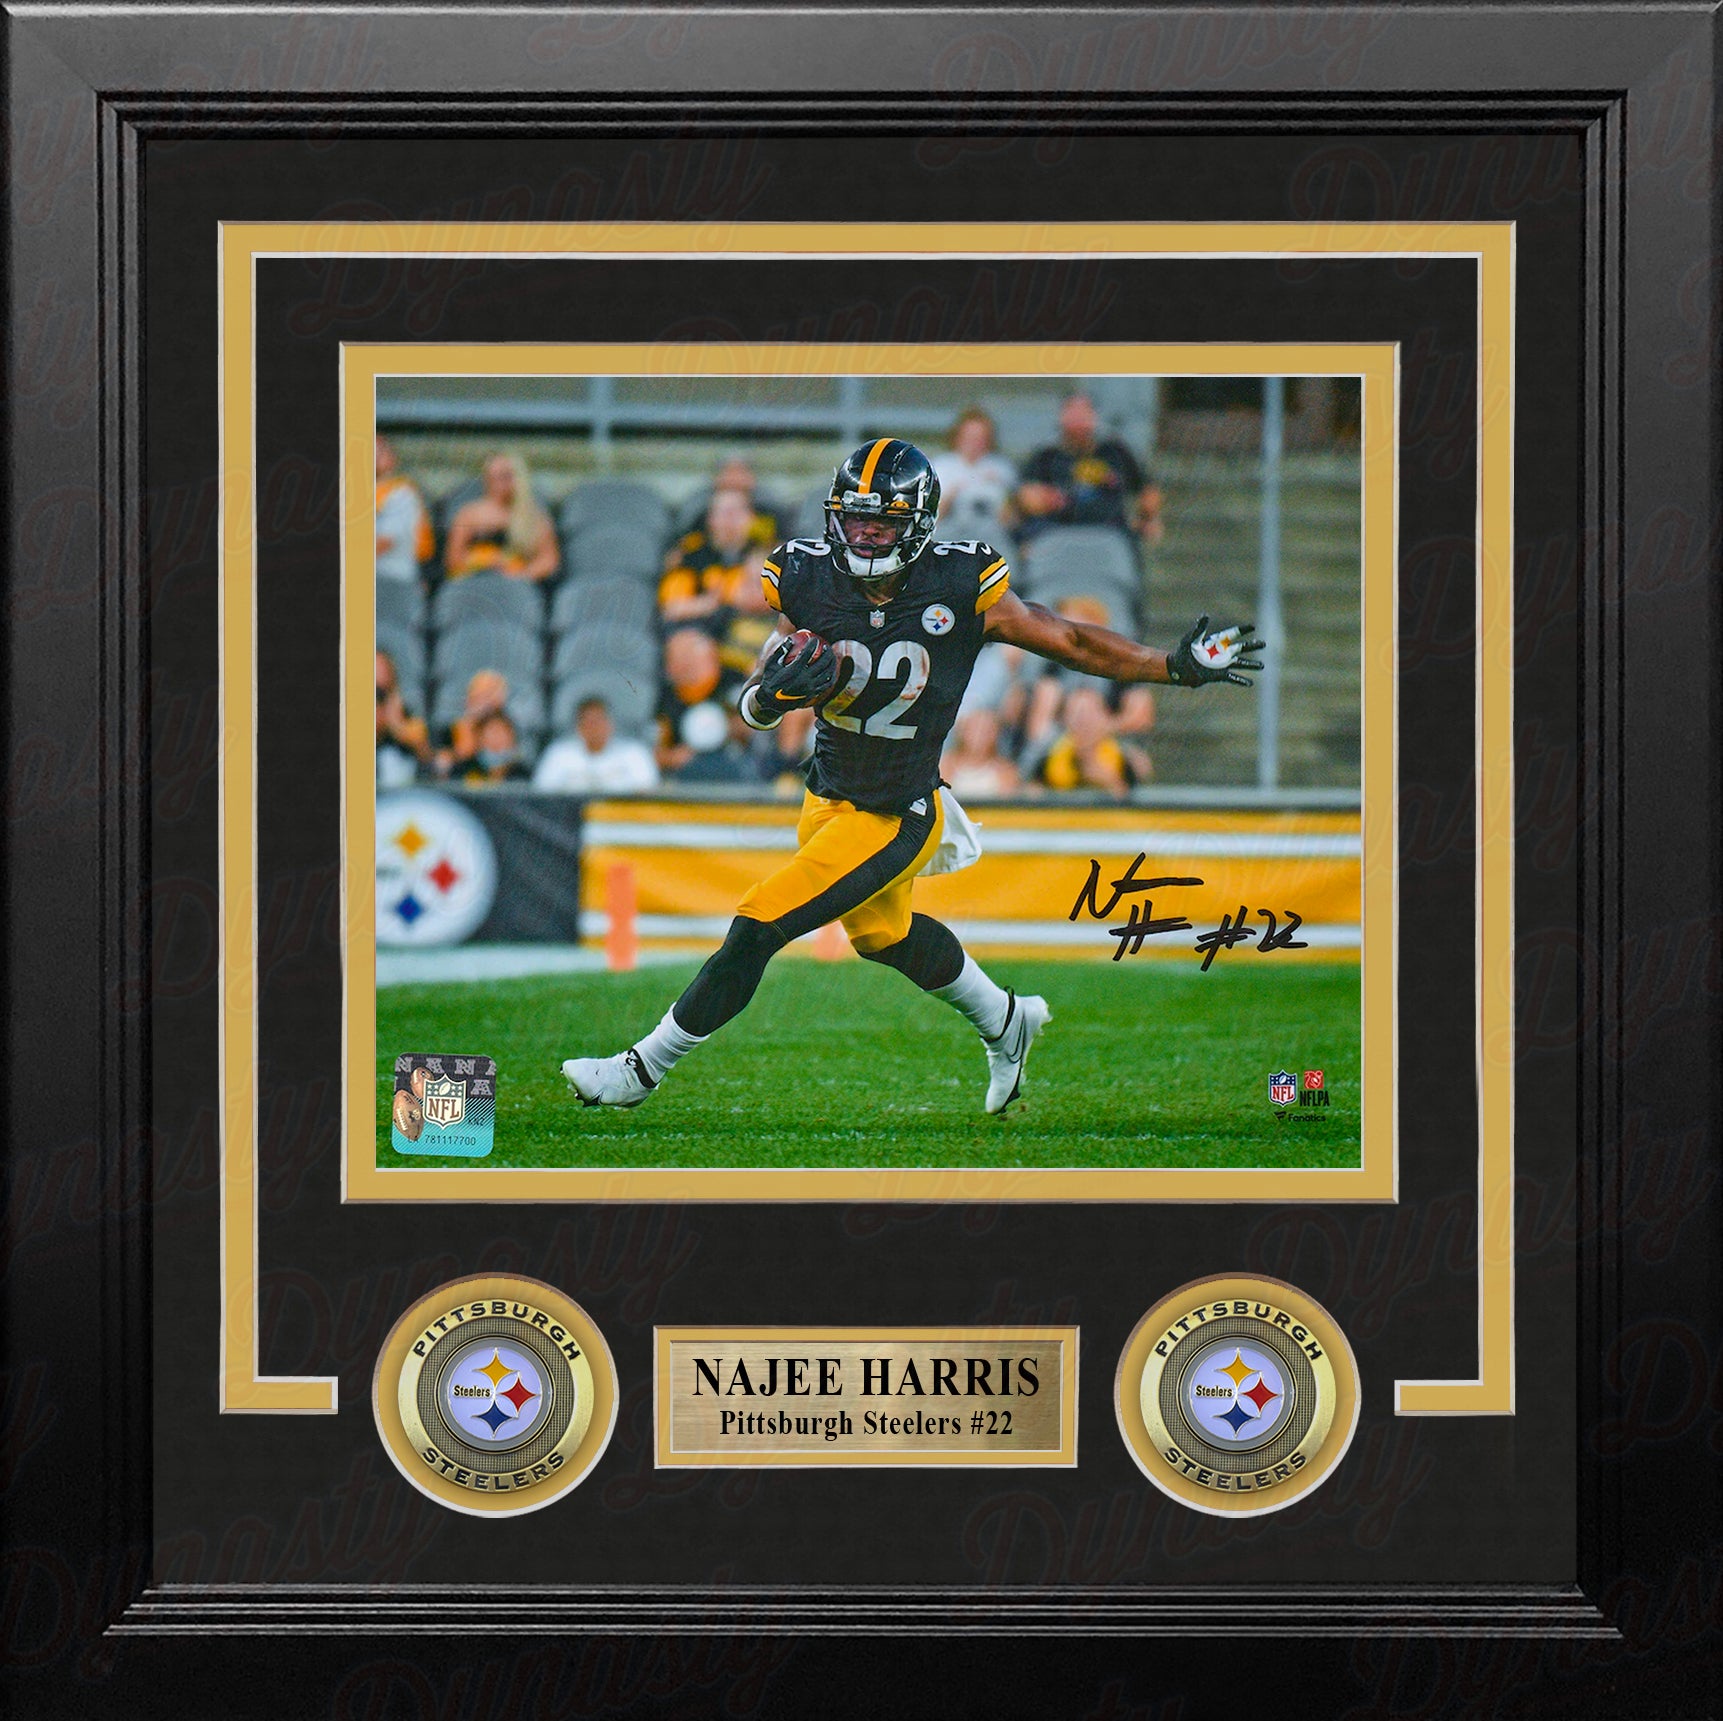 Najee Harris in Action Pittsburgh Steelers Autographed Framed Football Photo - Dynasty Sports & Framing 